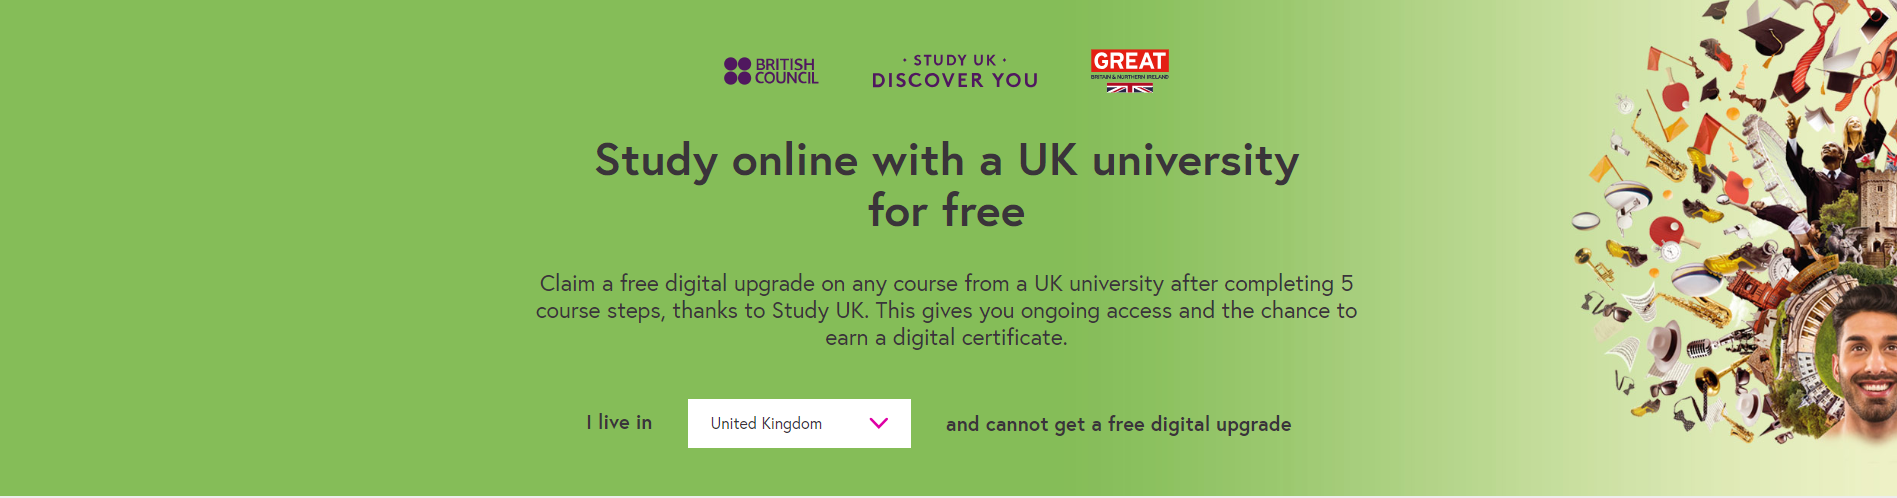 Screen shot of the FutureLearn sign up page with hyperlink to site embedded.